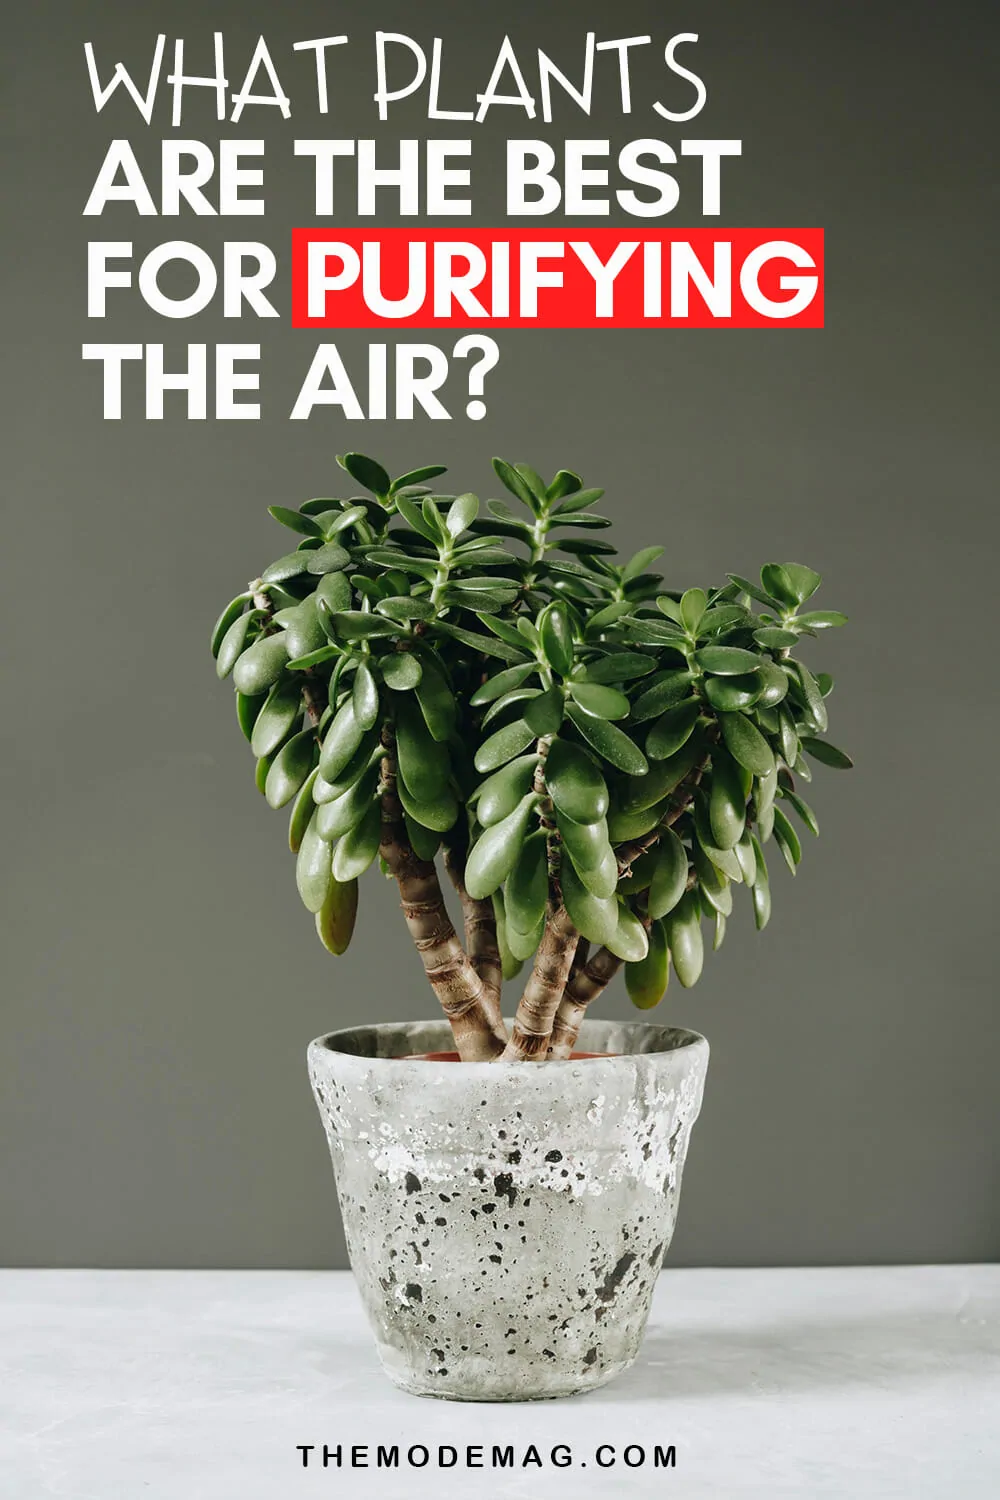 What Plants Are The Best For Purifying The Air?